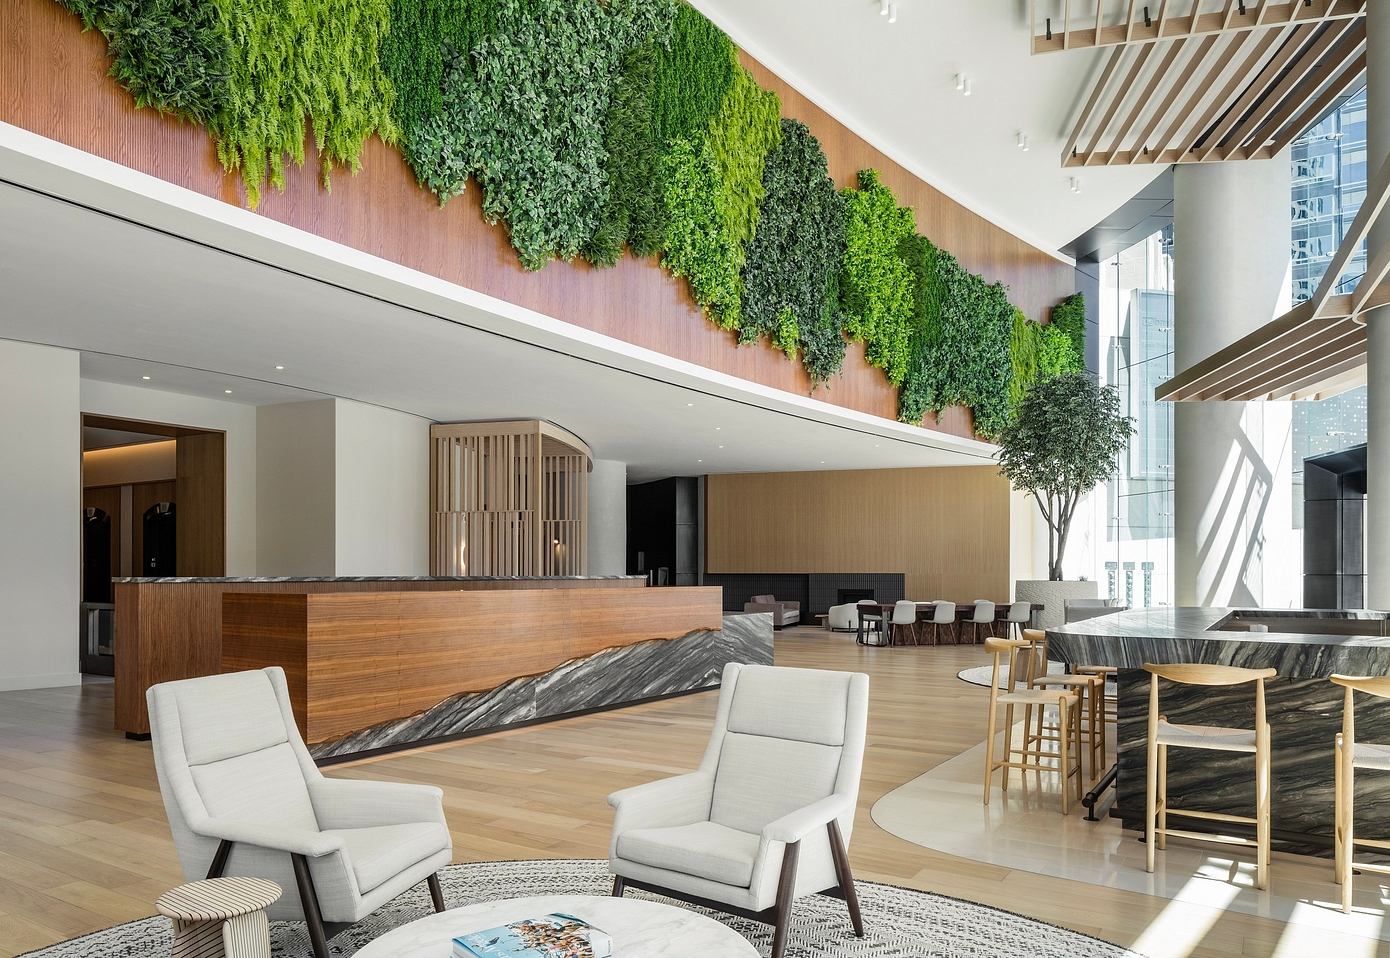 U.S. Bank Tower: Redesigning the Modern Workplace Experience